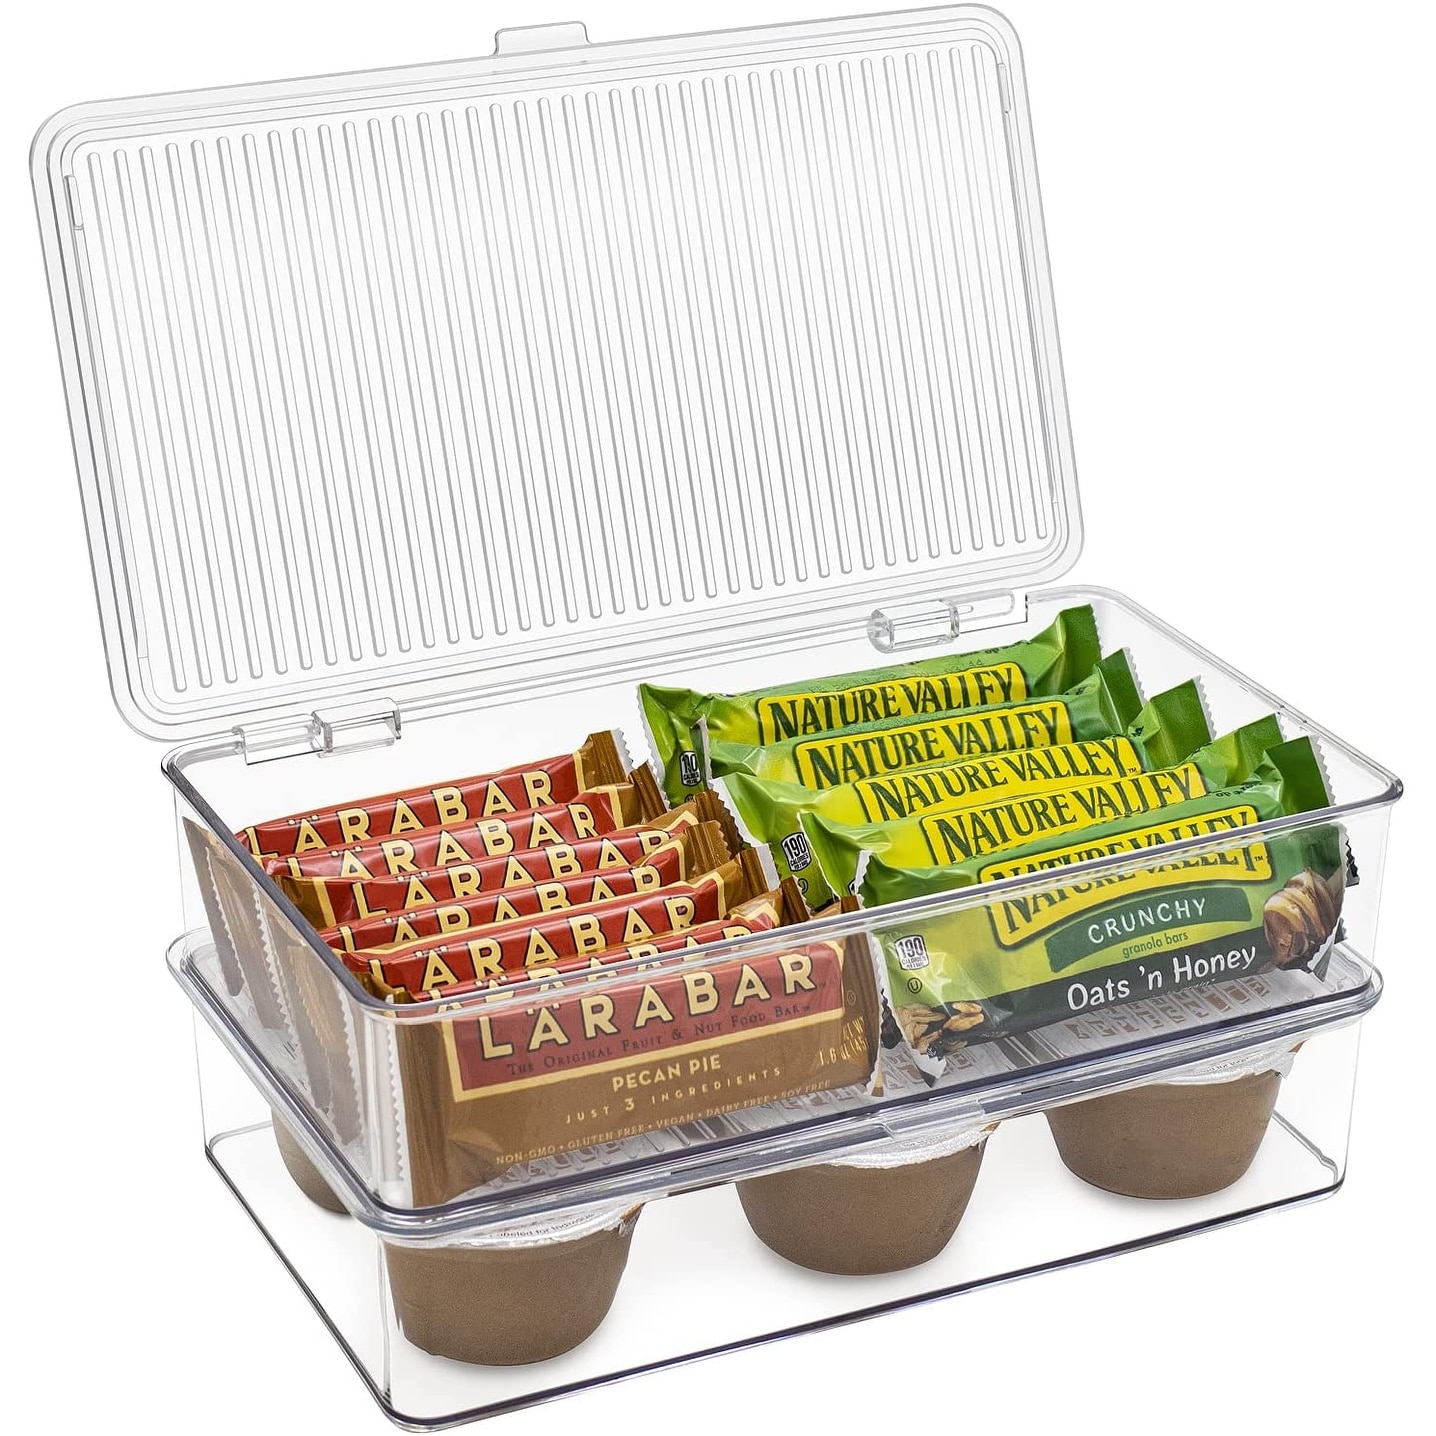 2-Pack Organizer bin with Lids, Kitchen Pantry & Fridge Food Storage  Containers - On Sale - Bed Bath & Beyond - 35540902